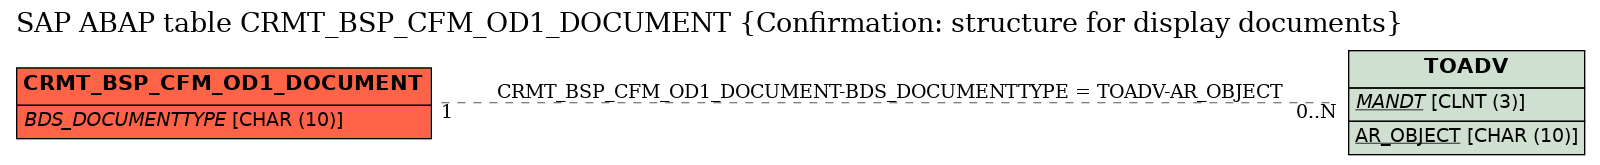 E-R Diagram for table CRMT_BSP_CFM_OD1_DOCUMENT (Confirmation: structure for display documents)